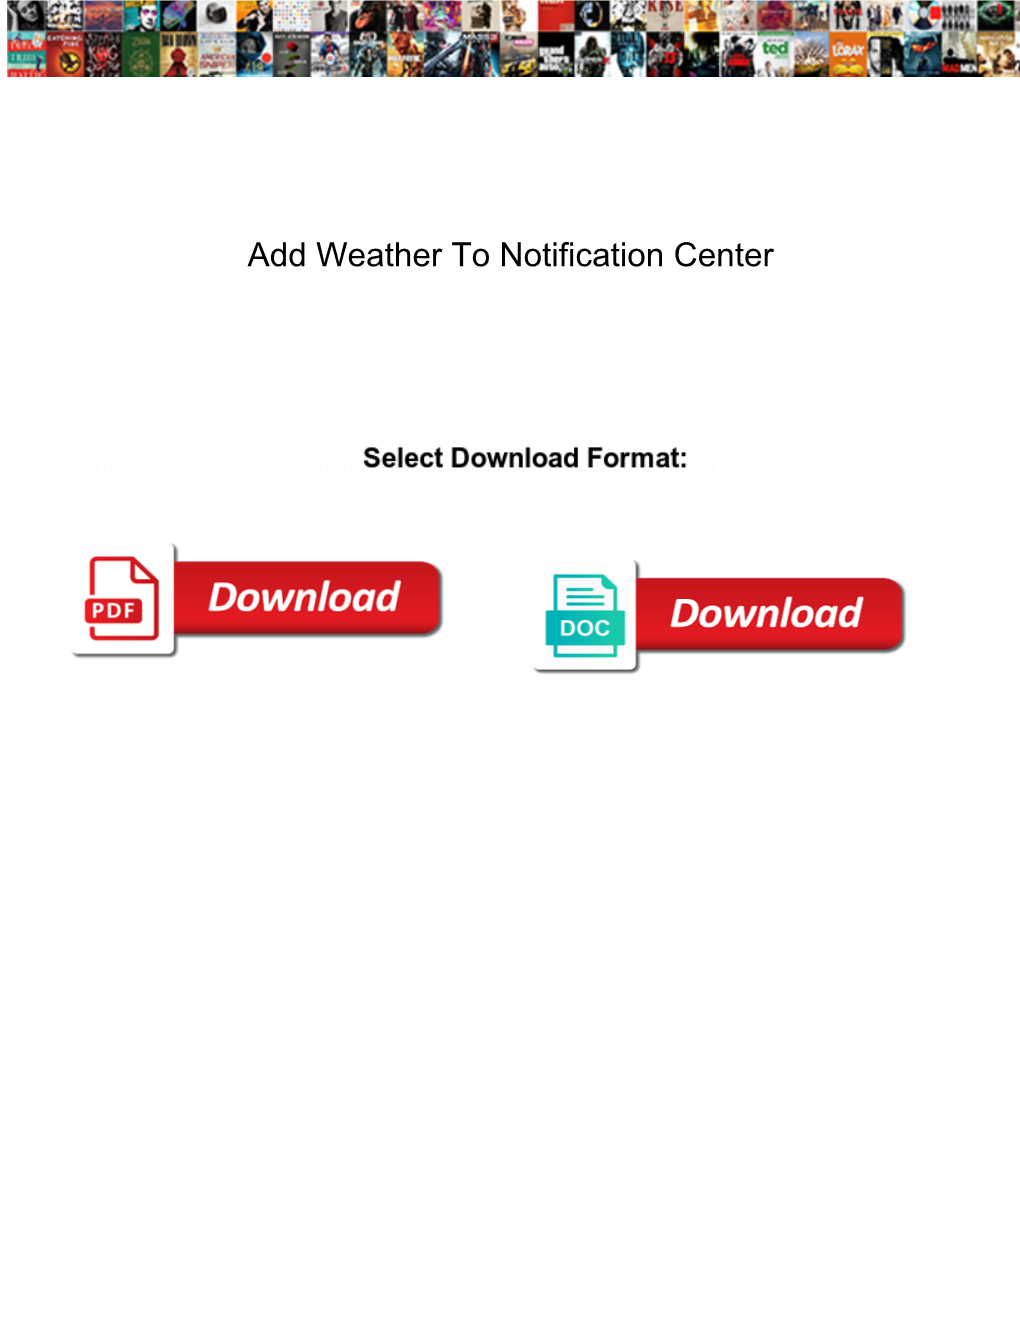 Add Weather to Notification Center